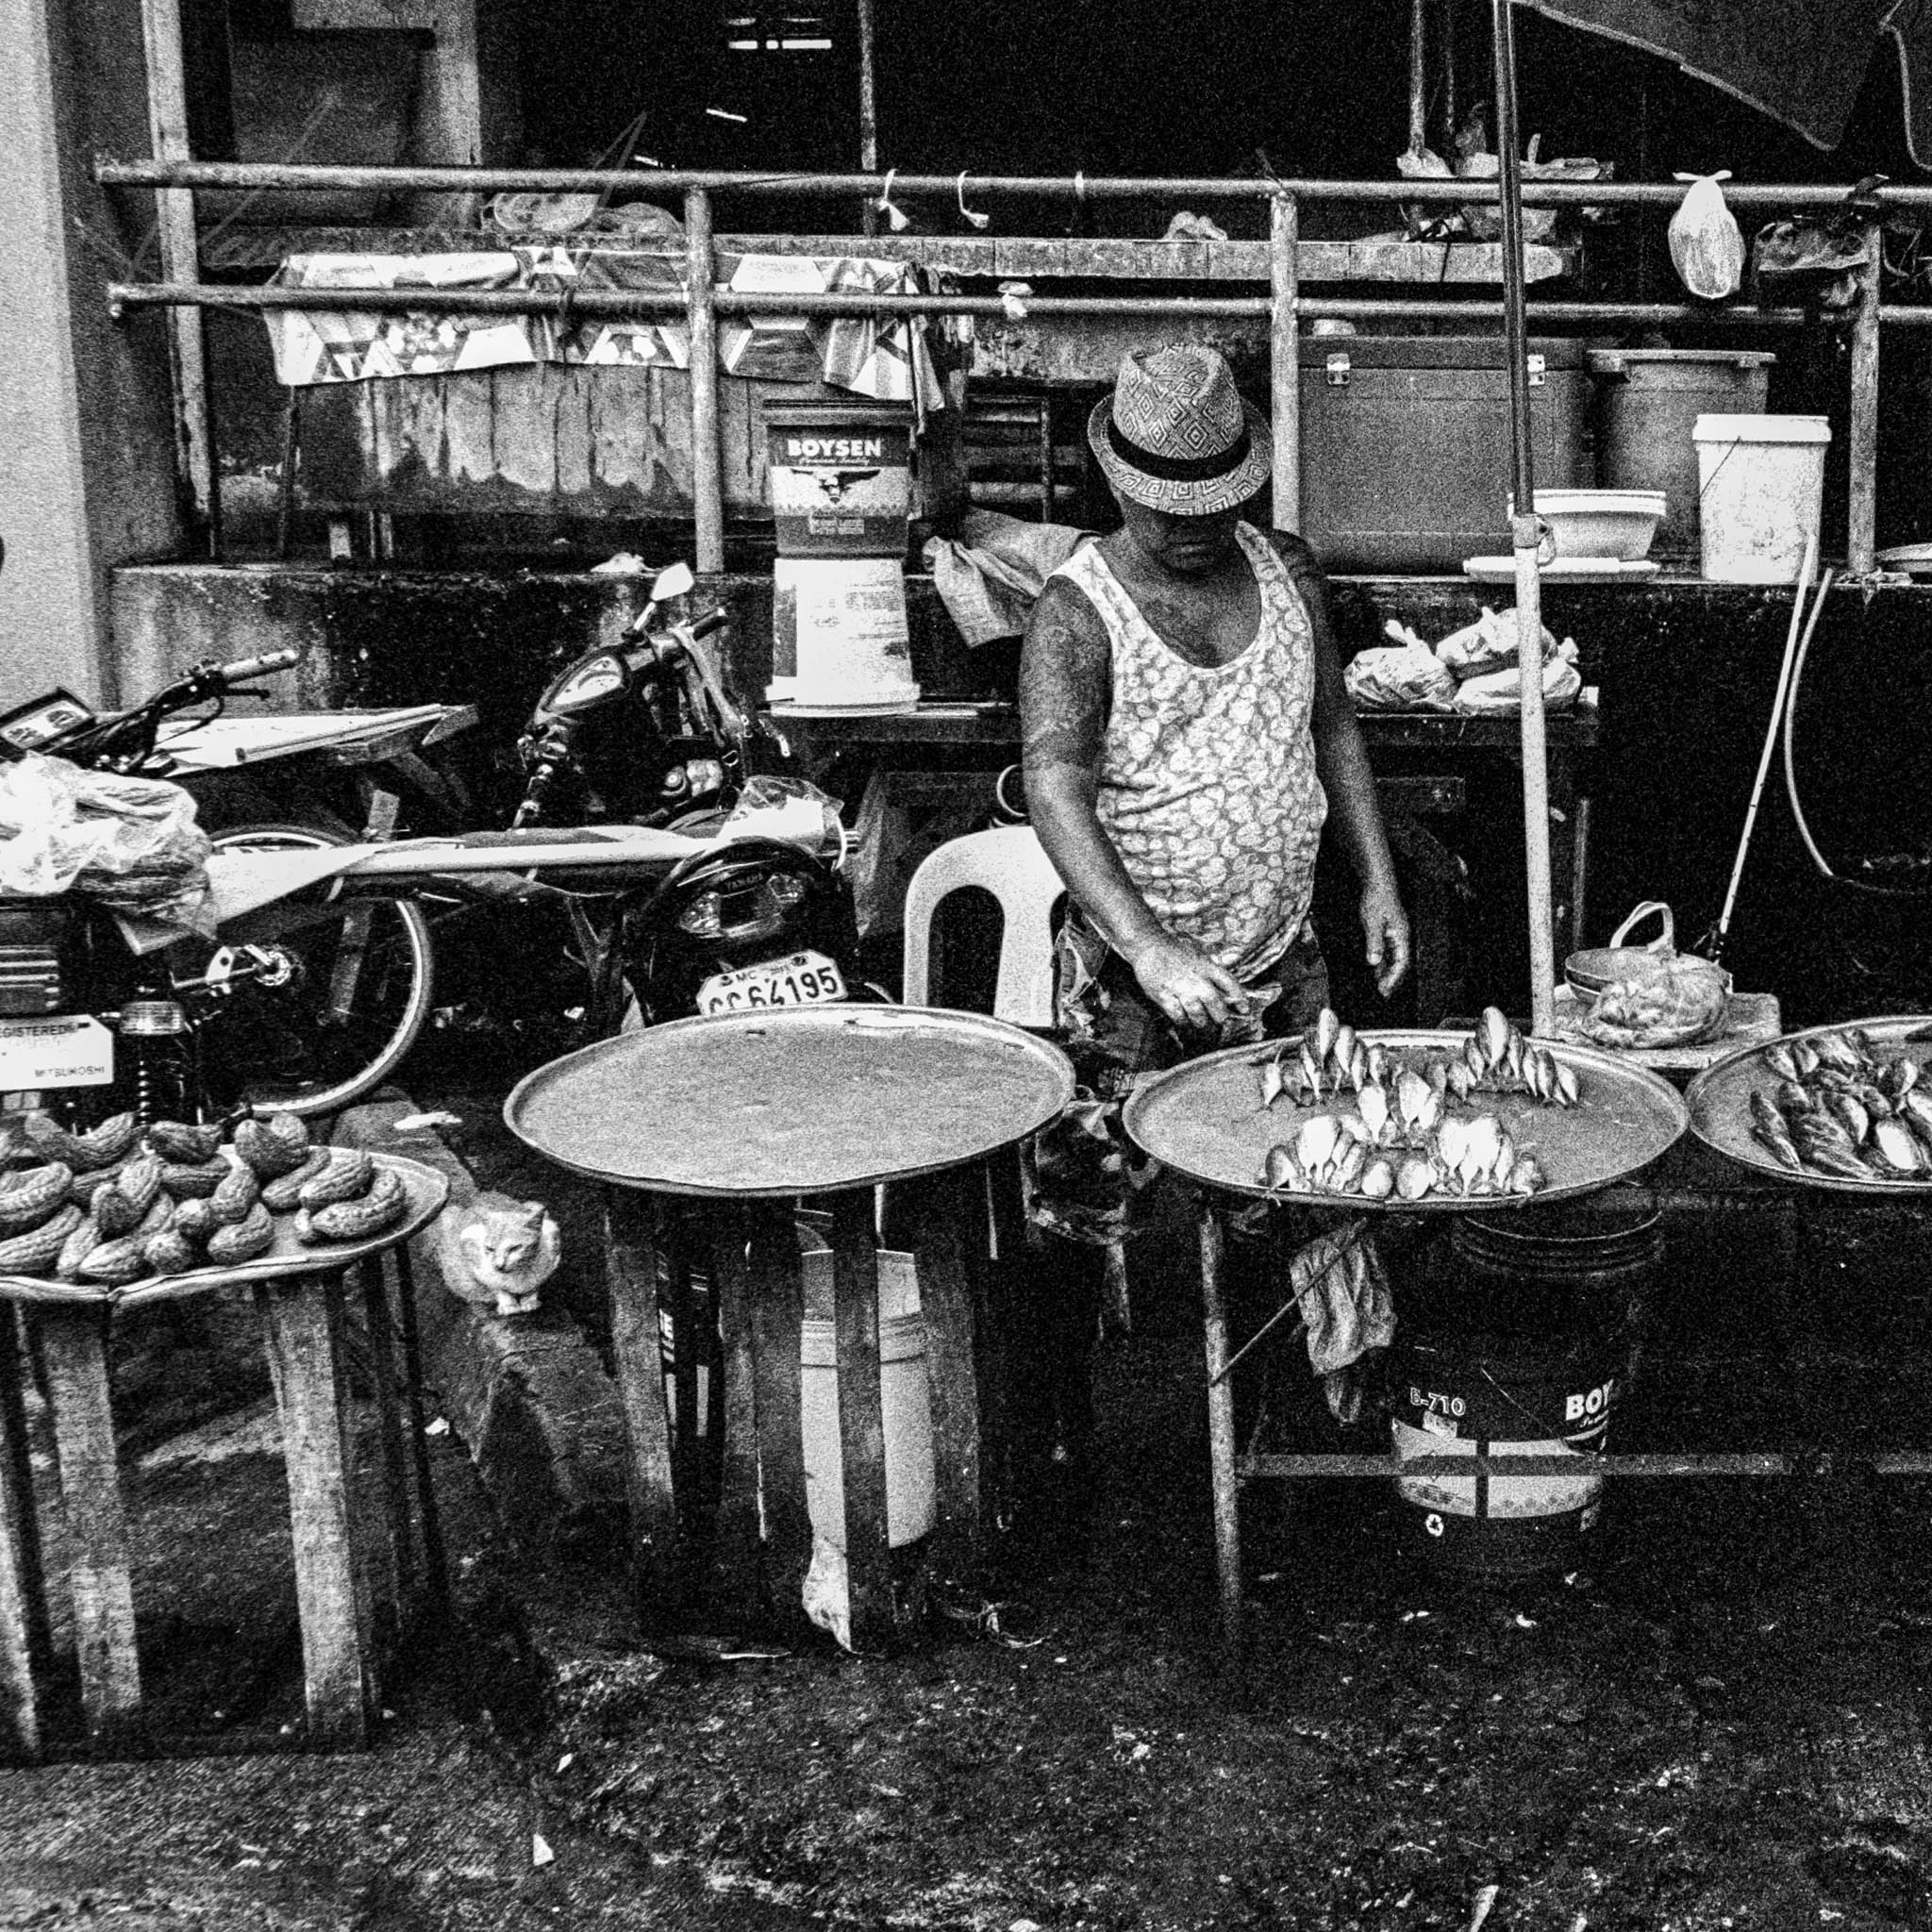 Monochrome shot of a bustling outdoor street food market with a busy vendor at work.